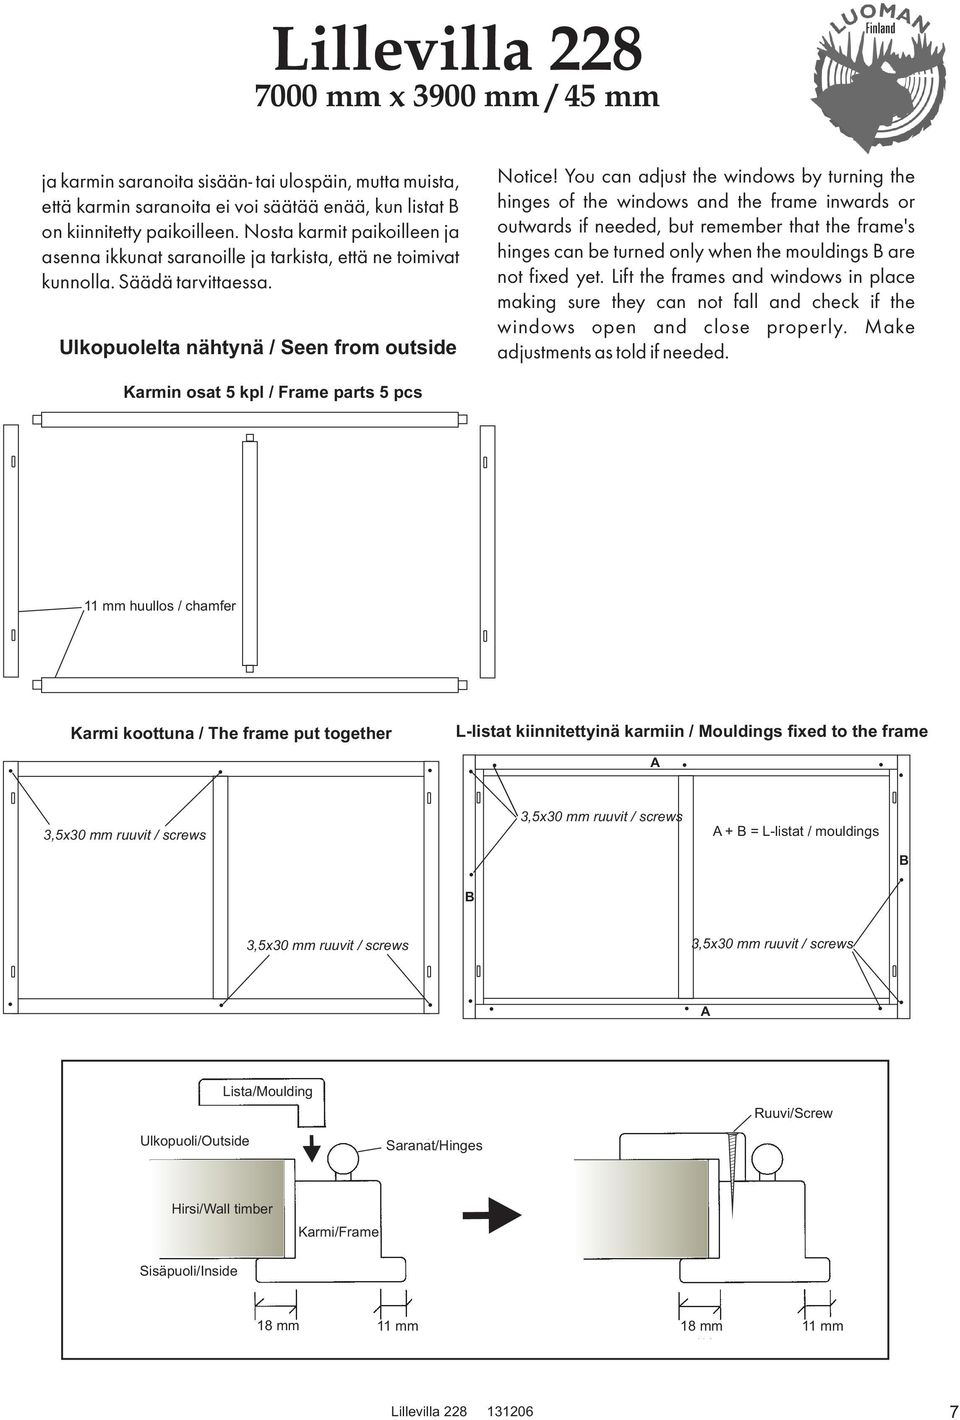 You can adjust the windows by turning the hinges of the windows and the frame inwards or outwards if needed, but remember that the frame's hinges can be turned only when the mouldings B are not fixed